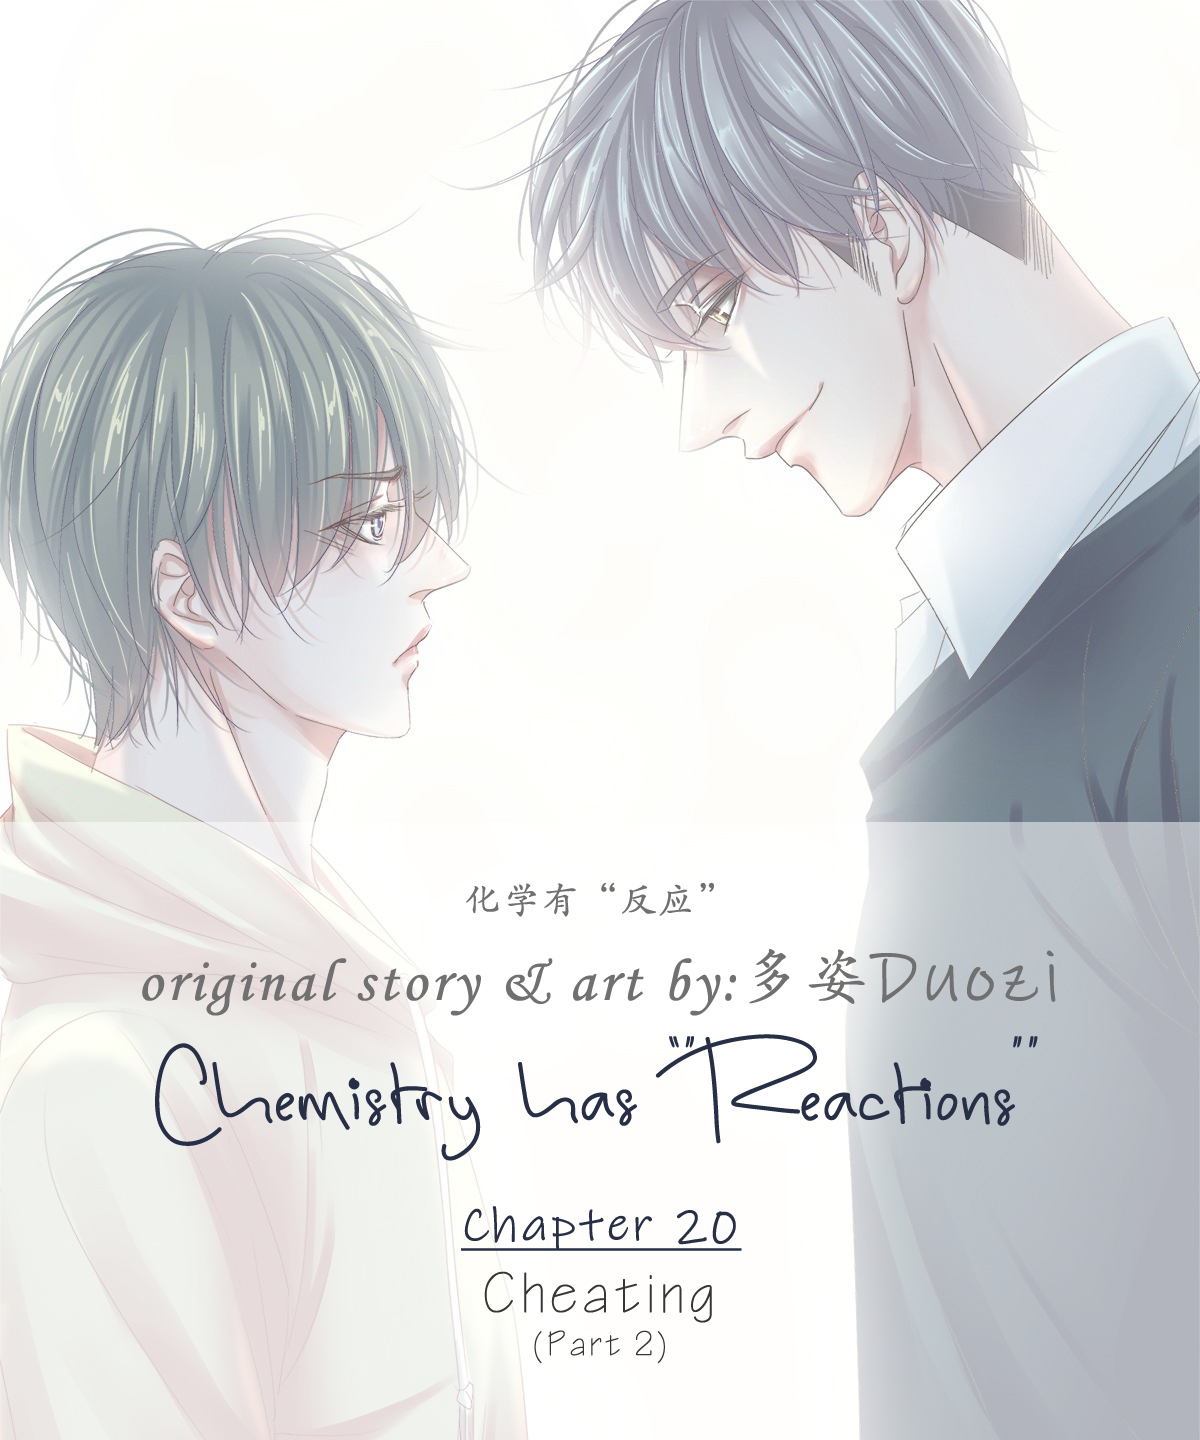 Chemistry has "Reactions" Vol. 1 Ch. 20